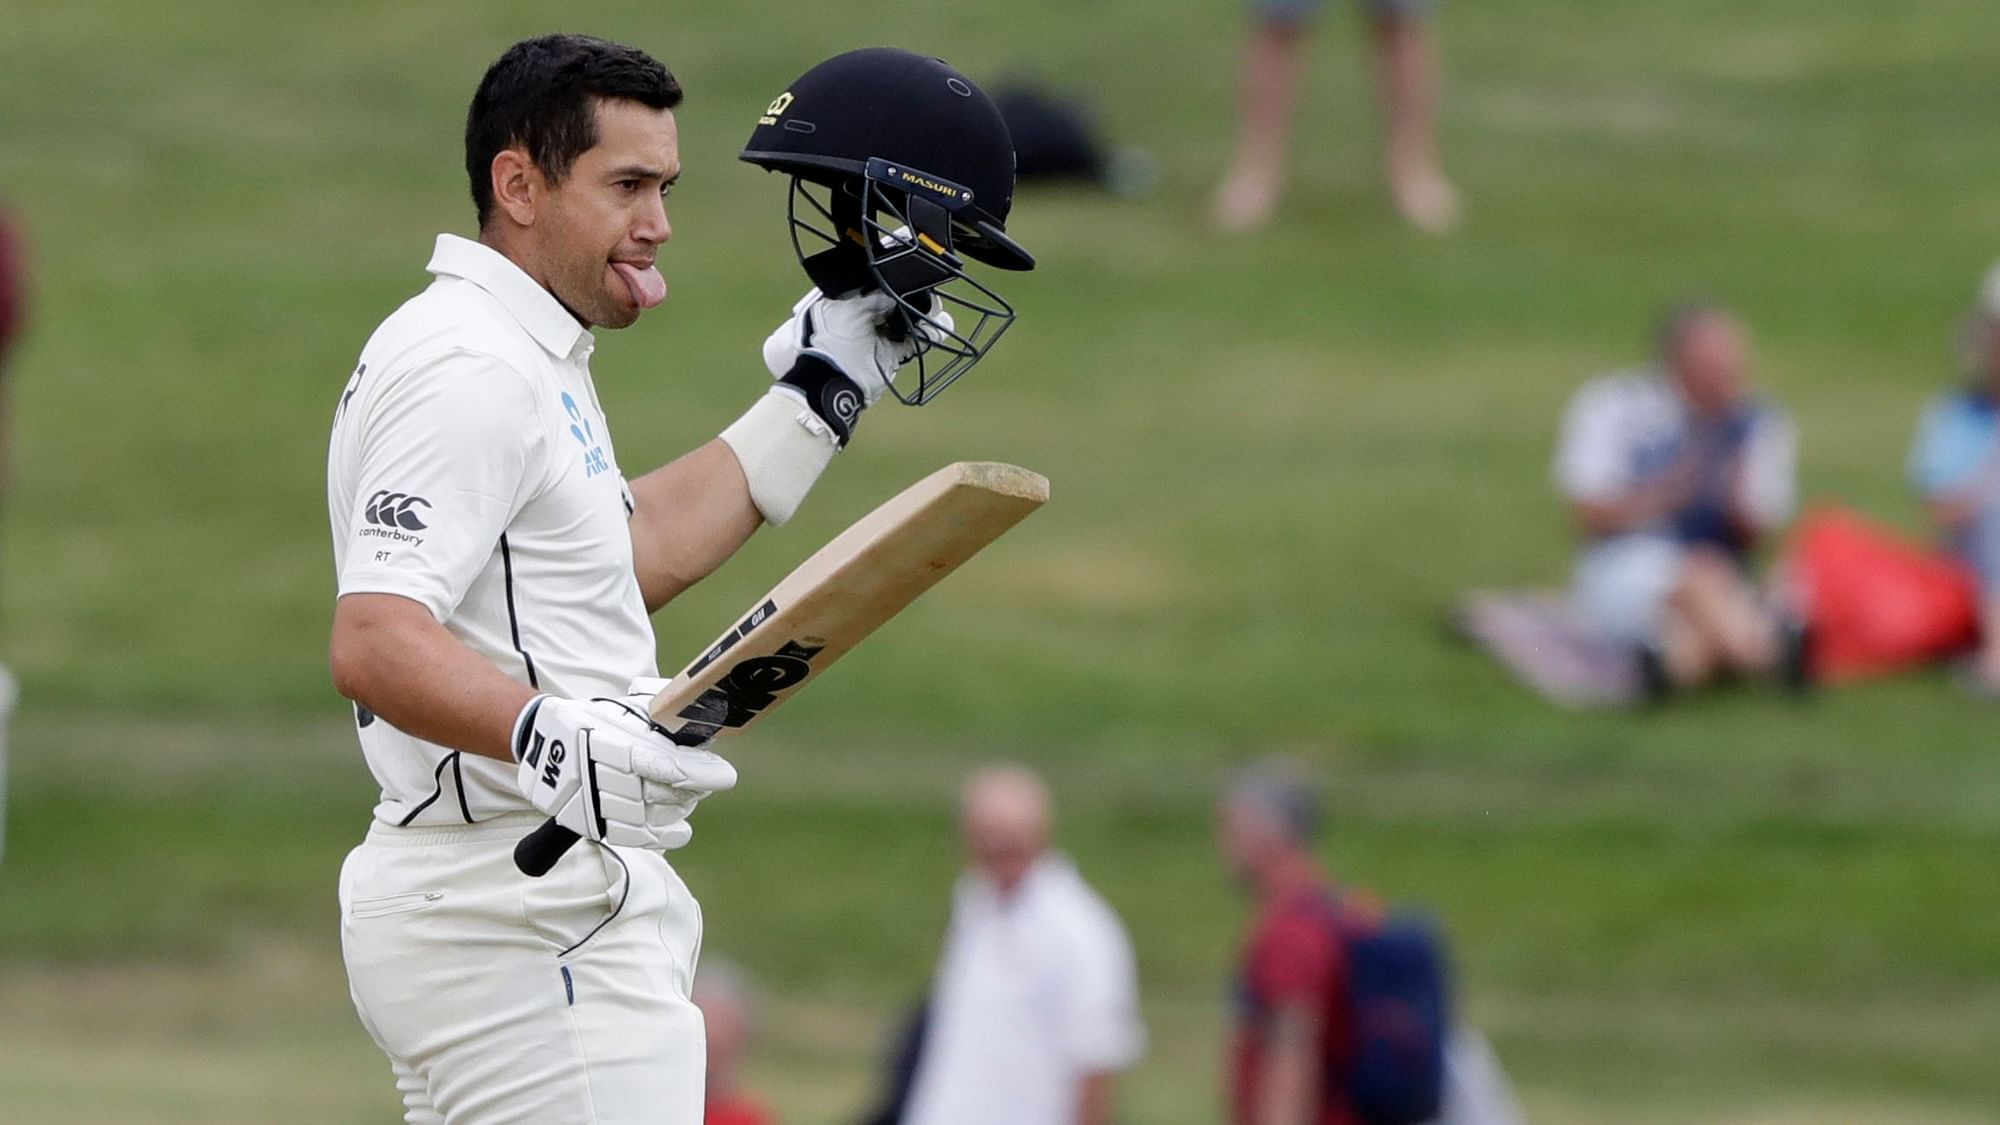 Ross Taylor has become New Zealand’s leading Test run-scorer, surpassing Stephen Fleming to be touted as the most prolific batsman for the Black Caps in red-ball cricket.  